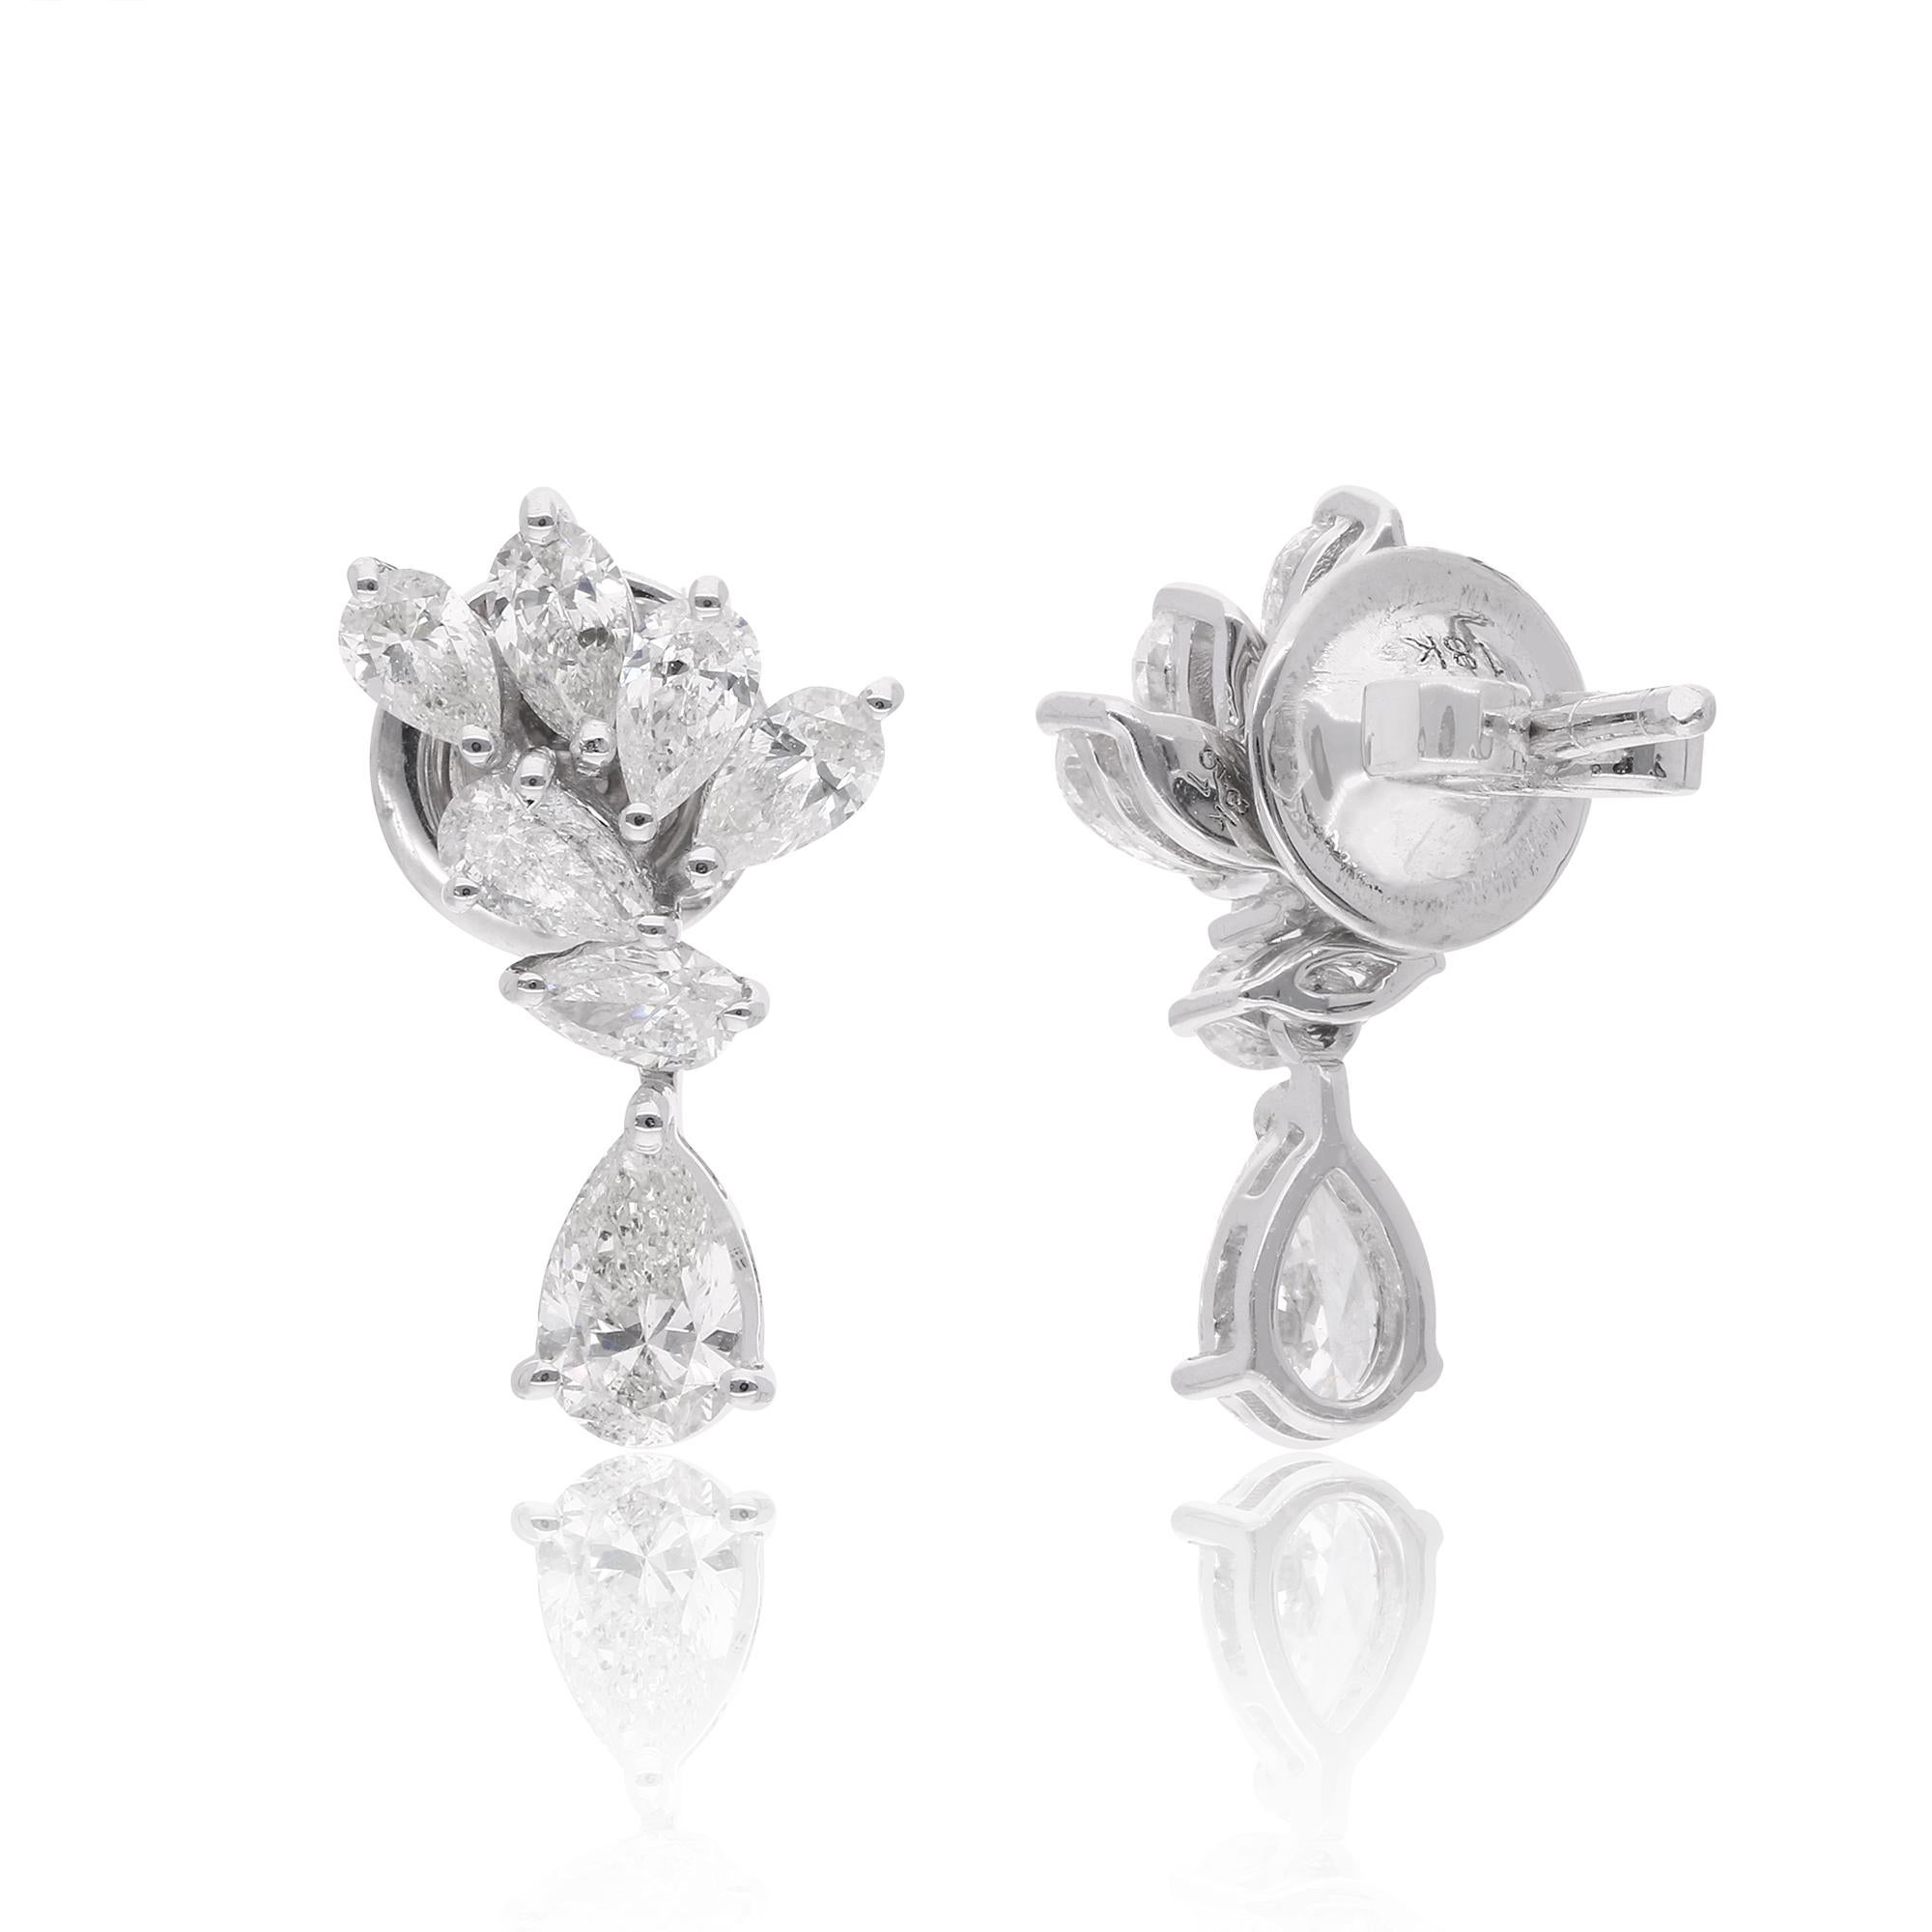 Each earring features a brilliant round-cut diamond, totaling 1.82 carats in weight. The diamonds exhibit SI clarity, ensuring that they are free from visible inclusions, and HI color, which represents near-colorless diamonds with a subtle hint of